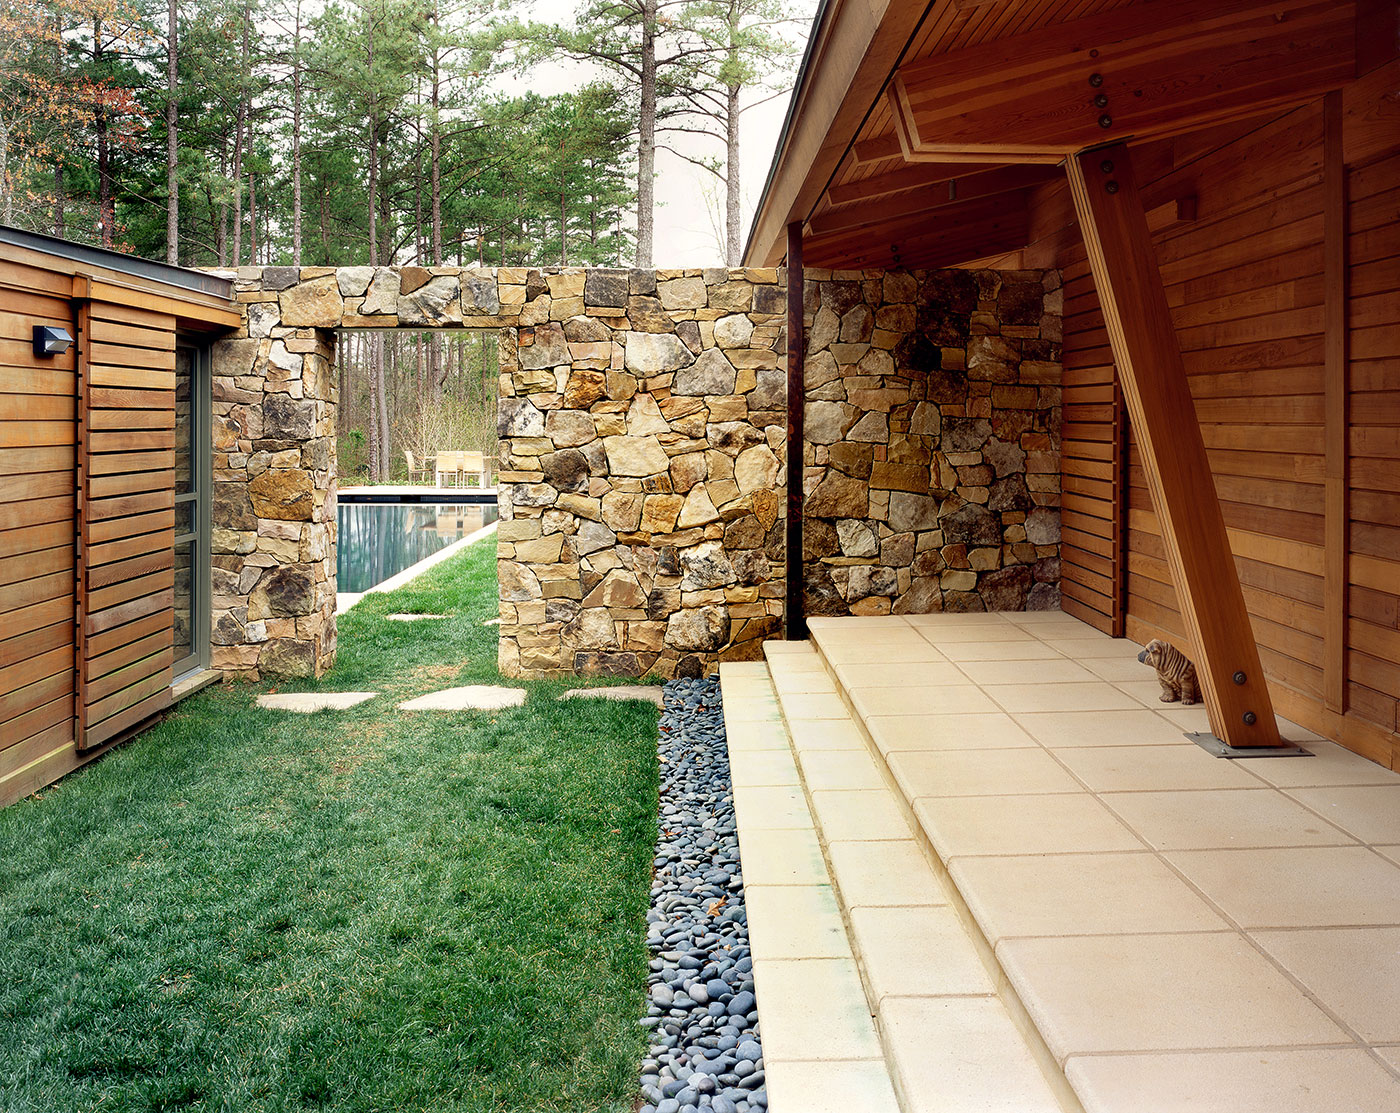 Curved Wood Glulam Beams, Canted Ganged Wood Columns at Limestone Terrace with Stone Wall n Charlotte, NC Modern Home, Designed by Best Virginia Architects.